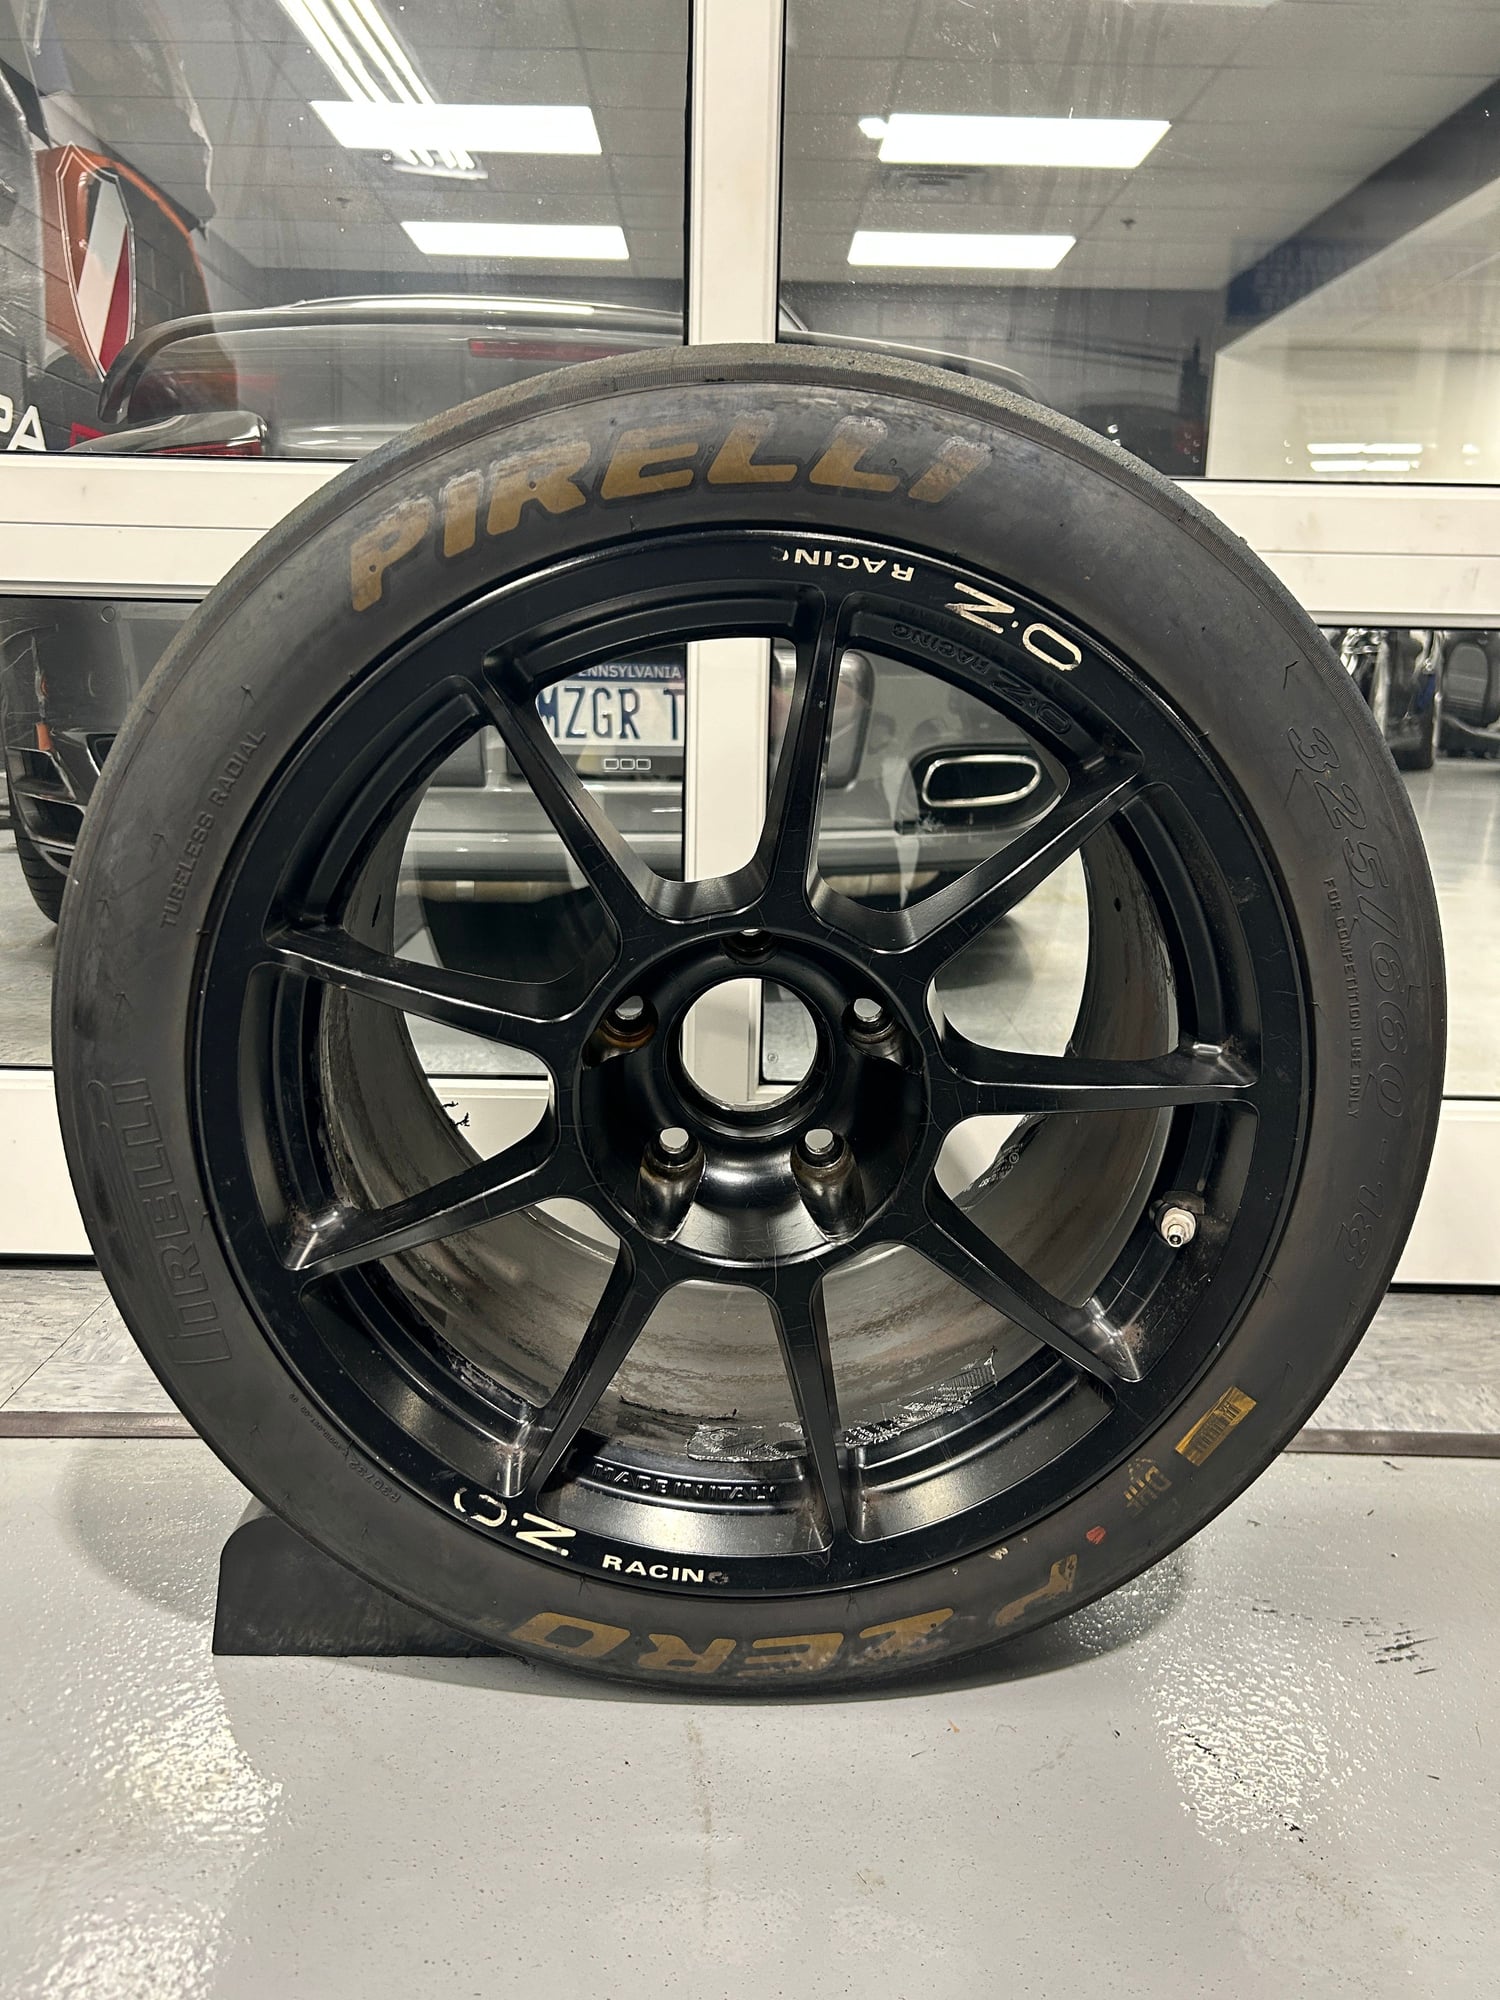 Wheels and Tires/Axles - Oz Racing Challenge HLT Wheels with Slicks - Used - -1 to 2025  All Models - Exton, PA 19341, United States